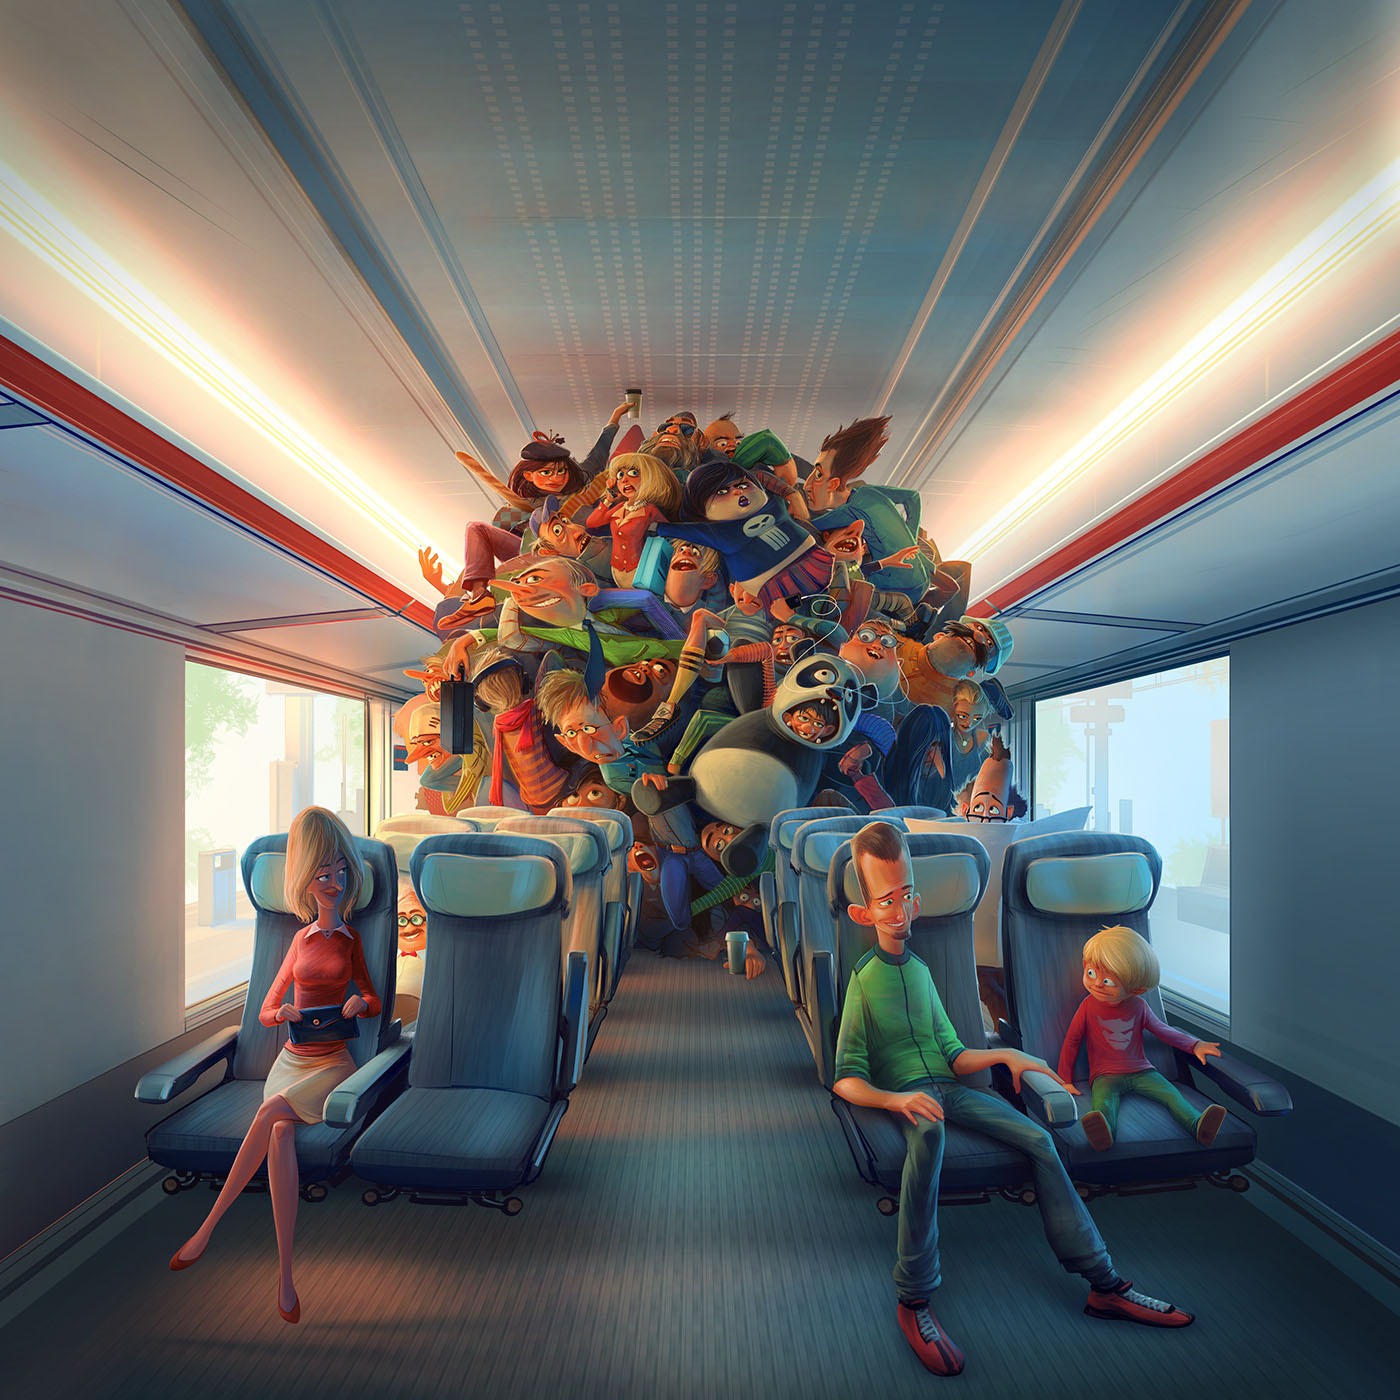 tangle jam train Transport Railways print Outdoor psa characters crowded Interior exterior public transport central perspective ball